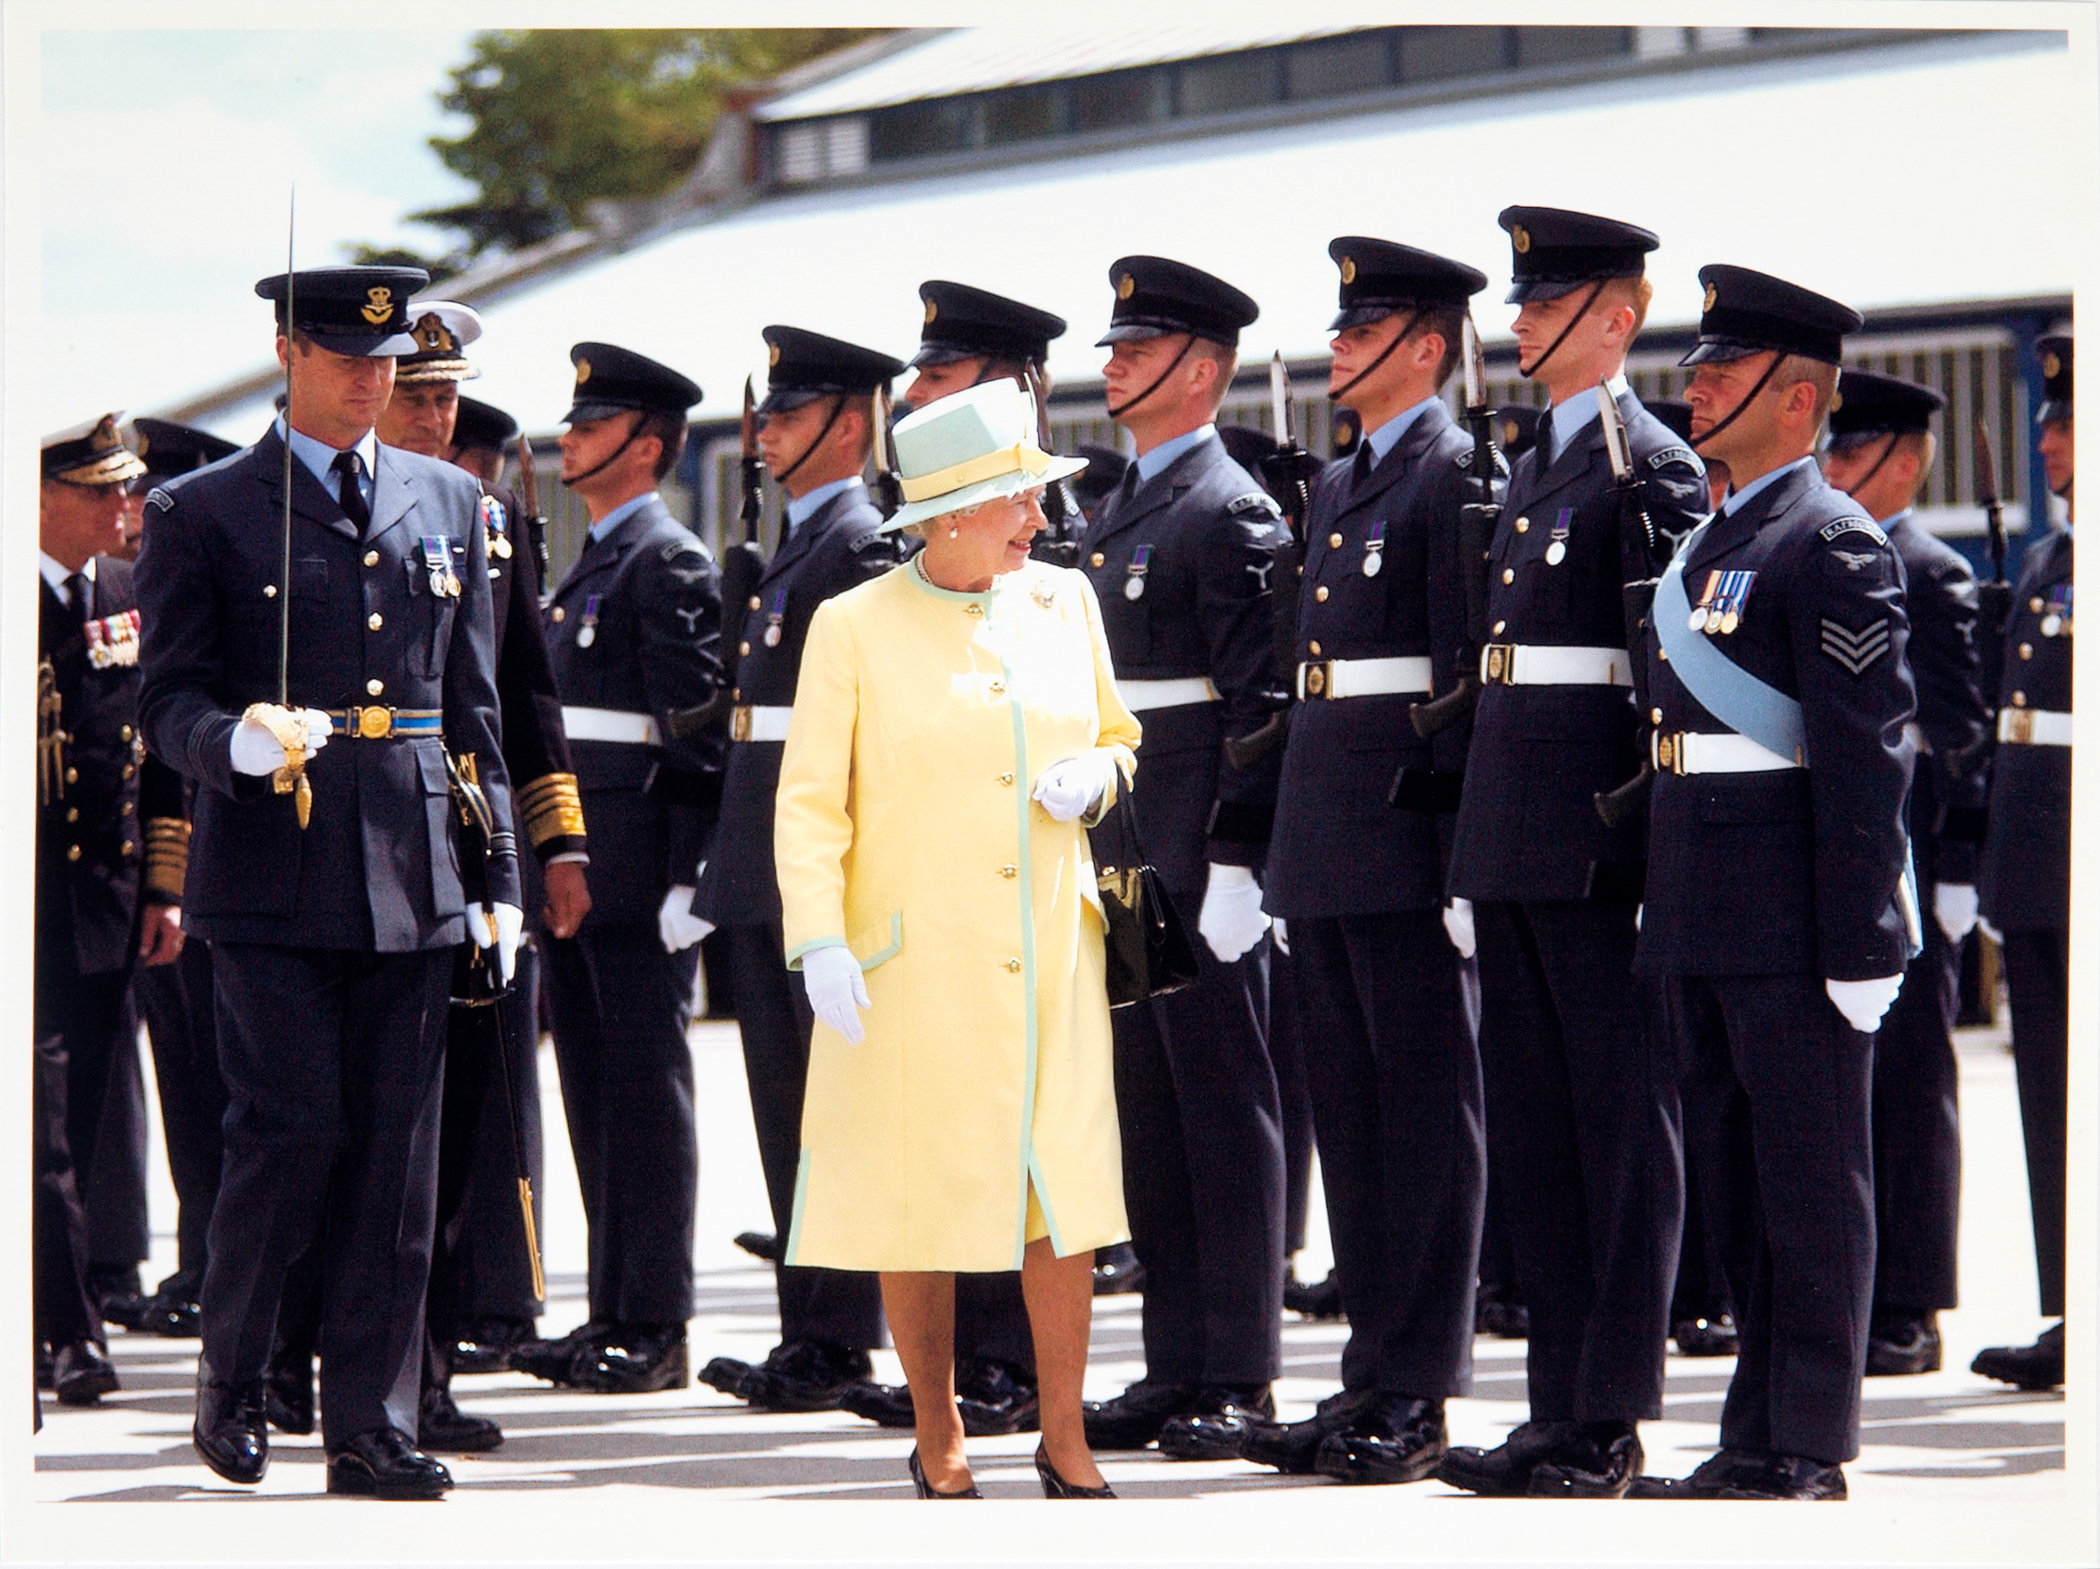 The Queen walks with Aviators on parade.